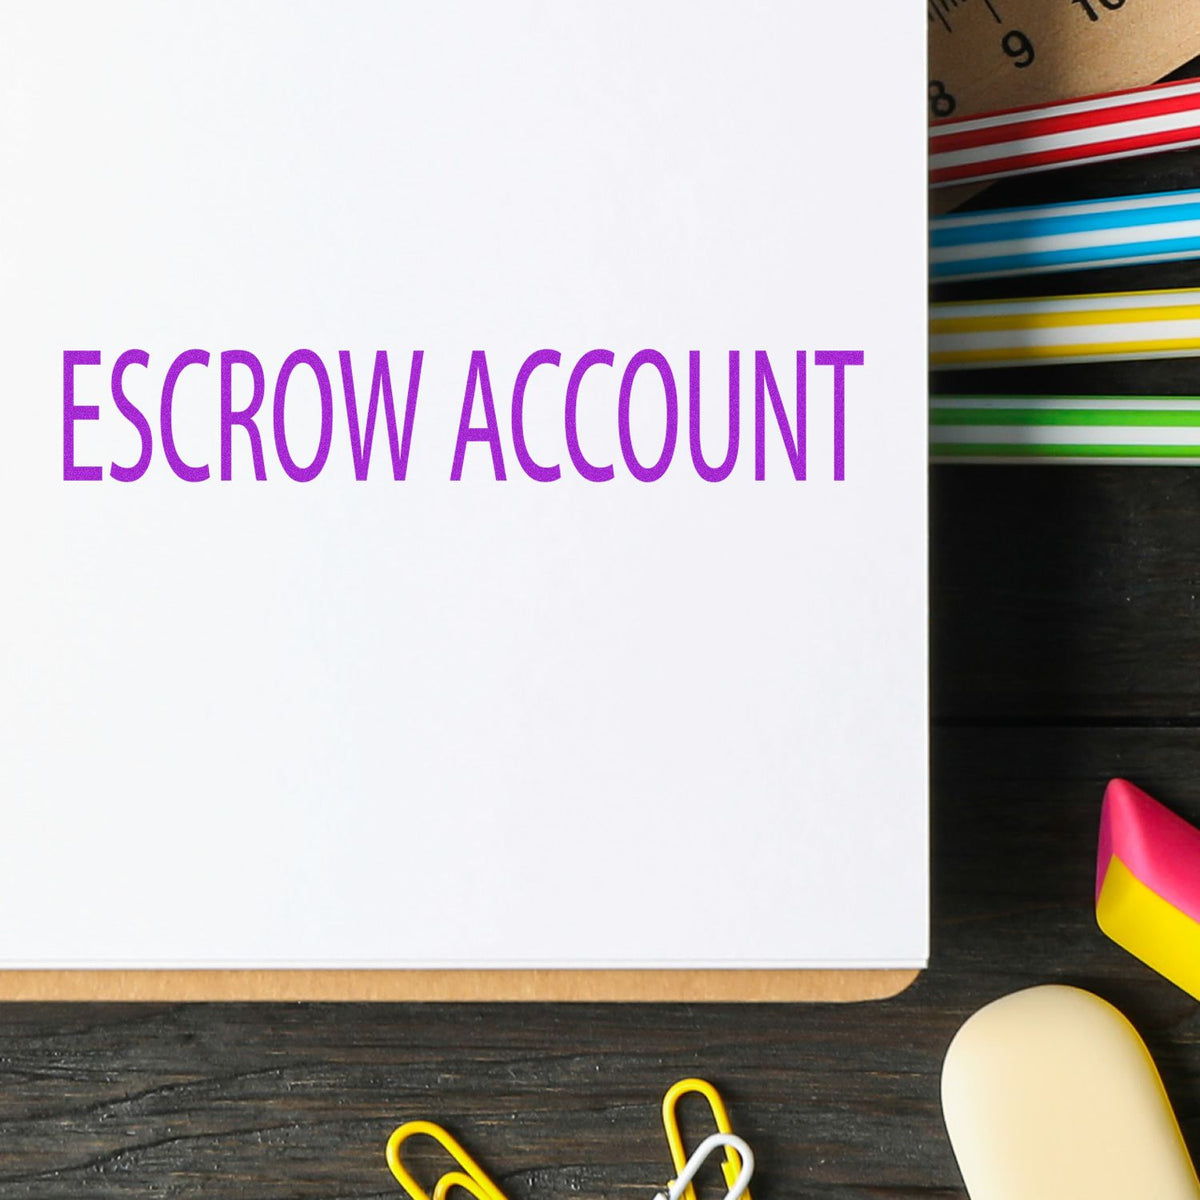 Slim Pre-Inked Escrow Account Stamp In Use